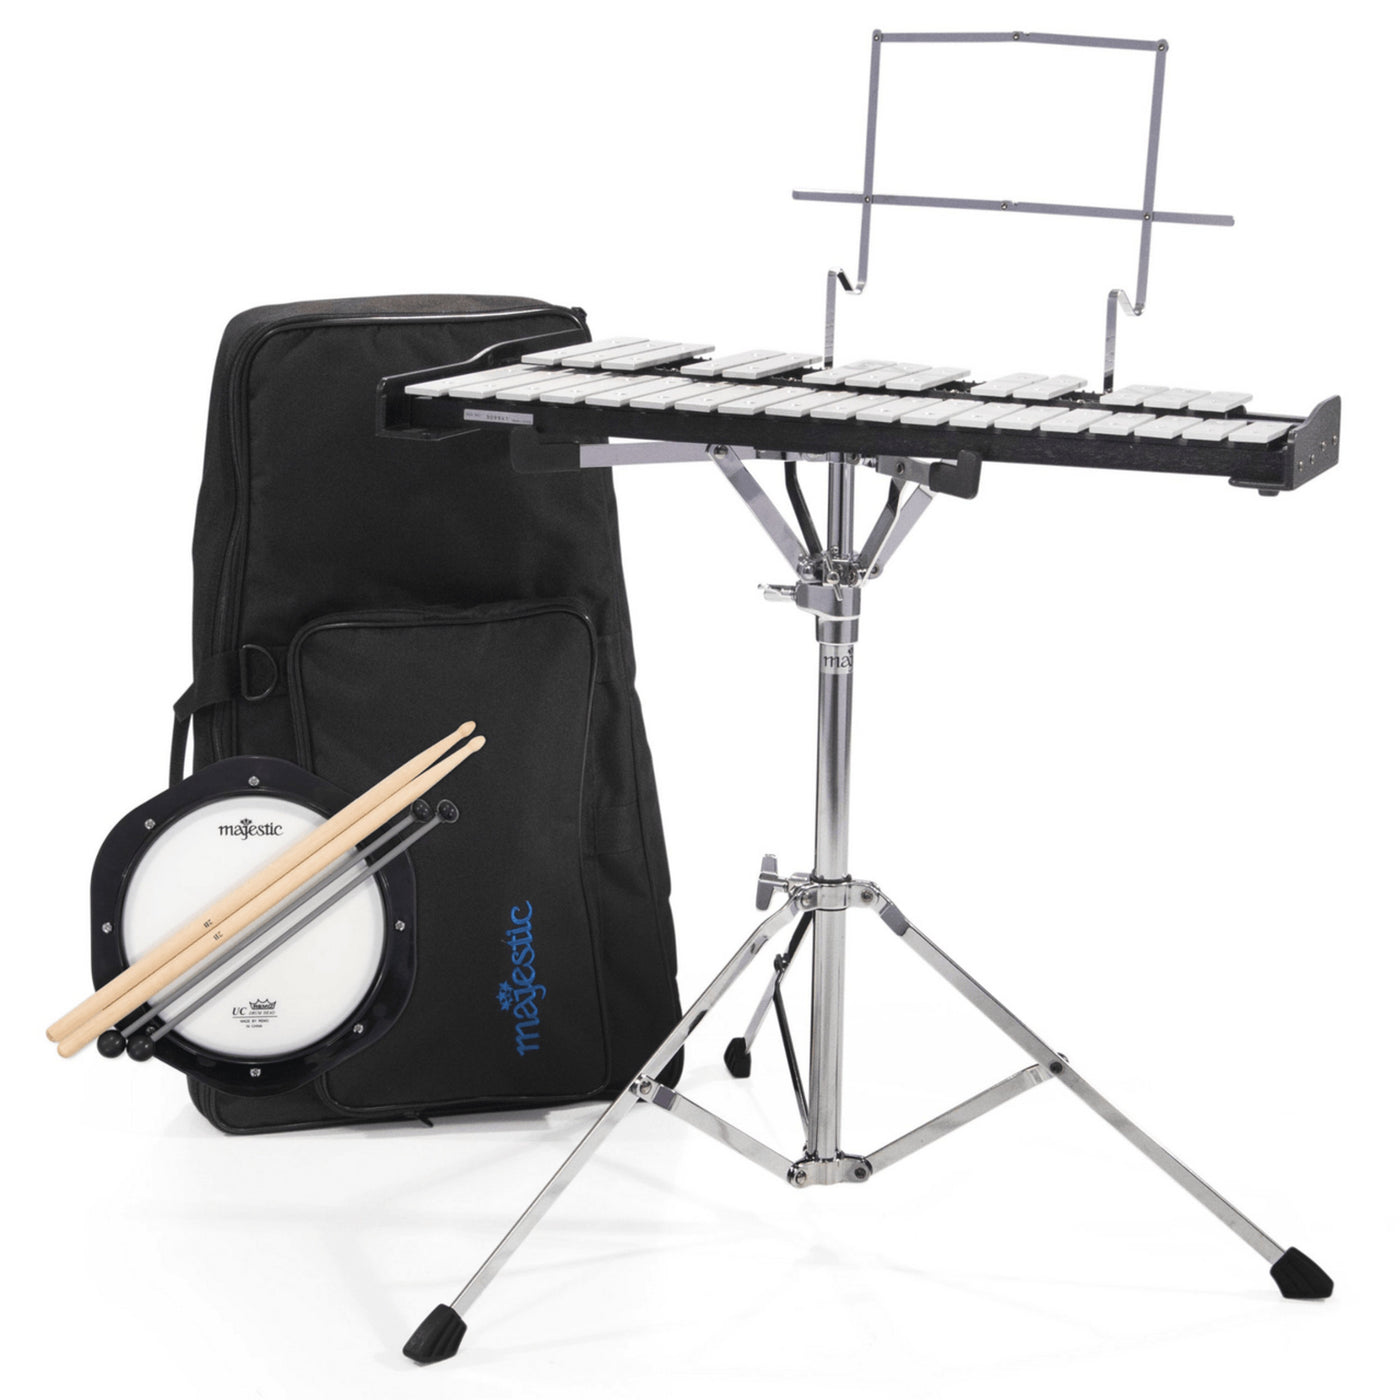 Majestic 2.5 Octave Bell Kit with Practice Pad, Mallets, Drumsticks, and Backpack